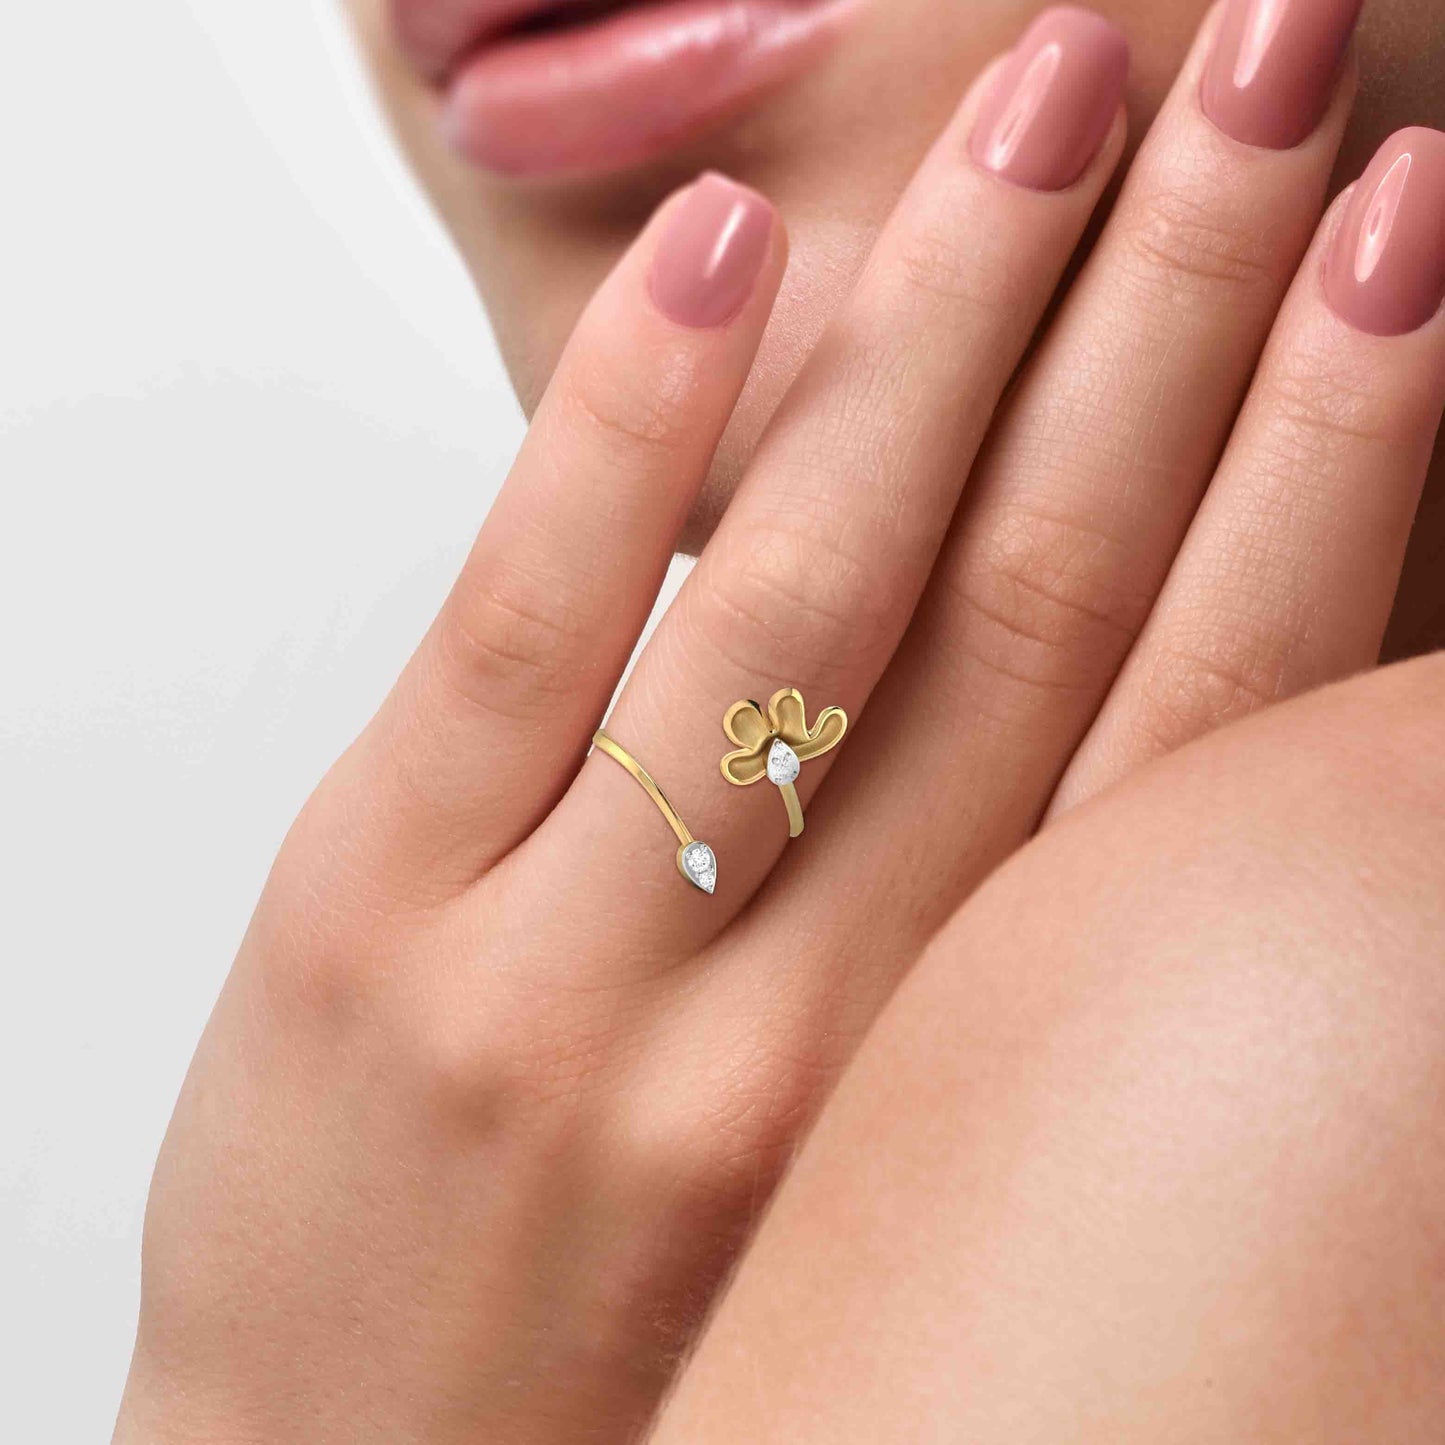 Unique Engagement Rings: Rings That Will Win Your Heart